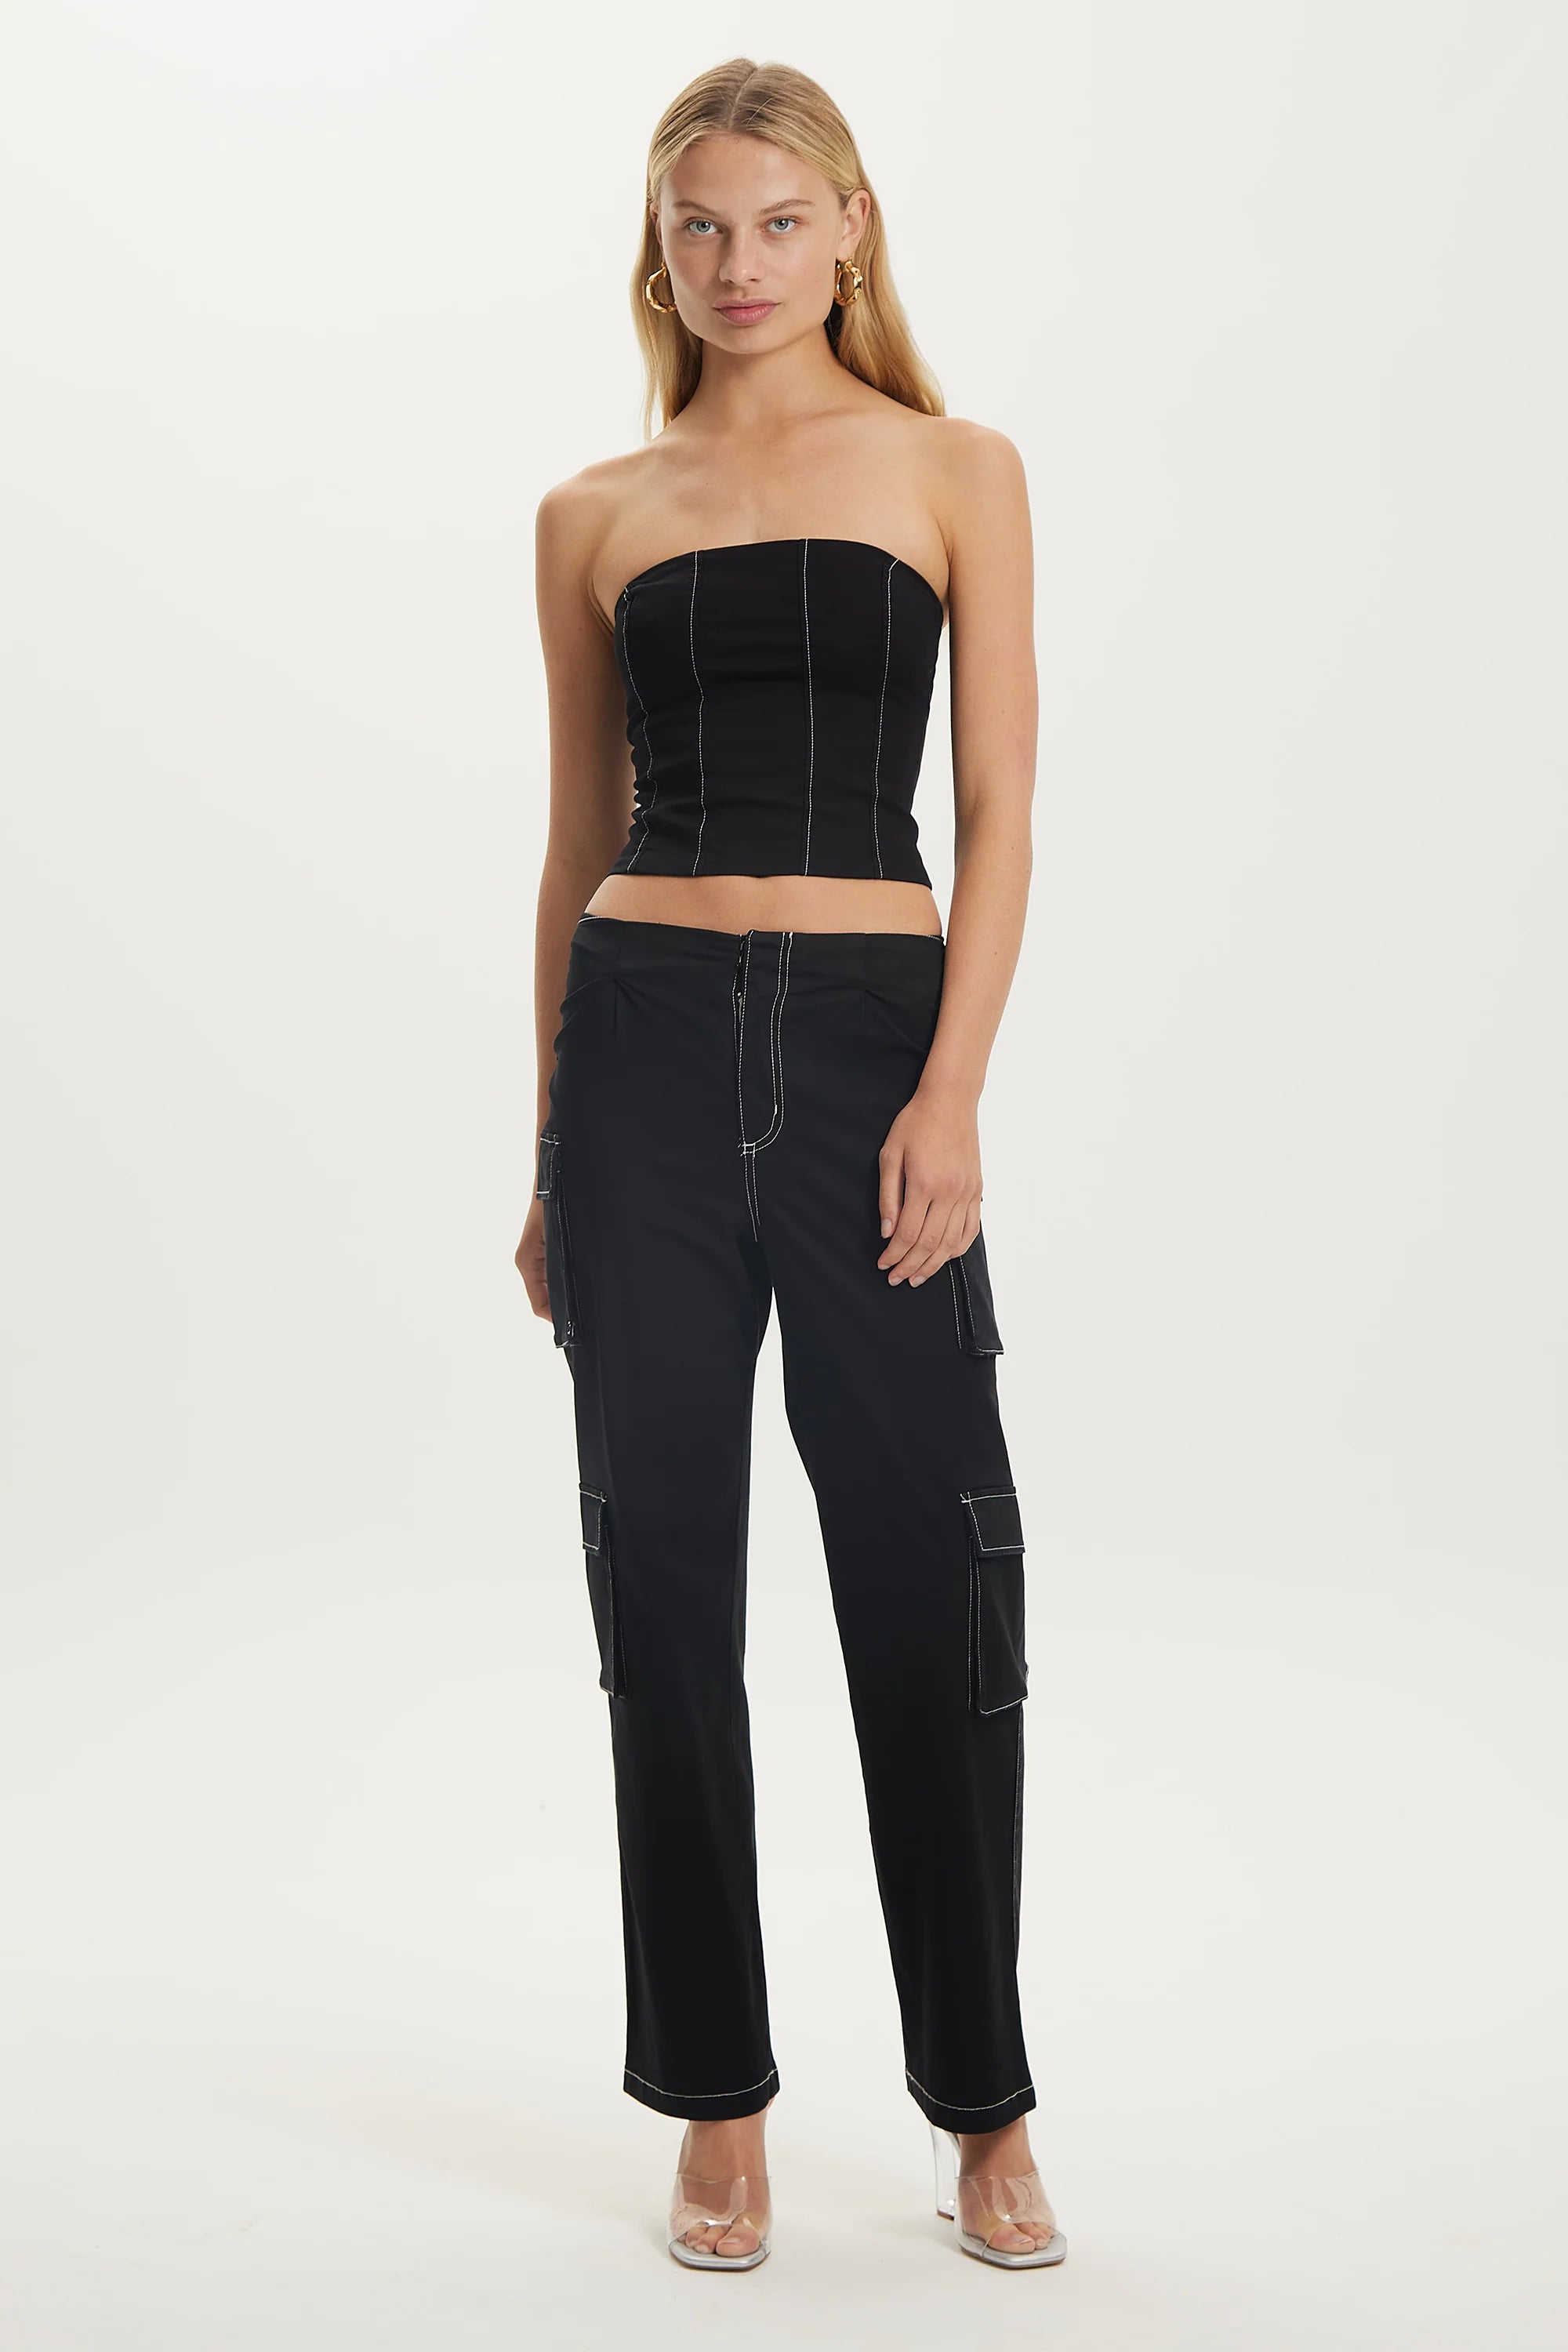 Third Form Open Road Corset Top - Washed Black